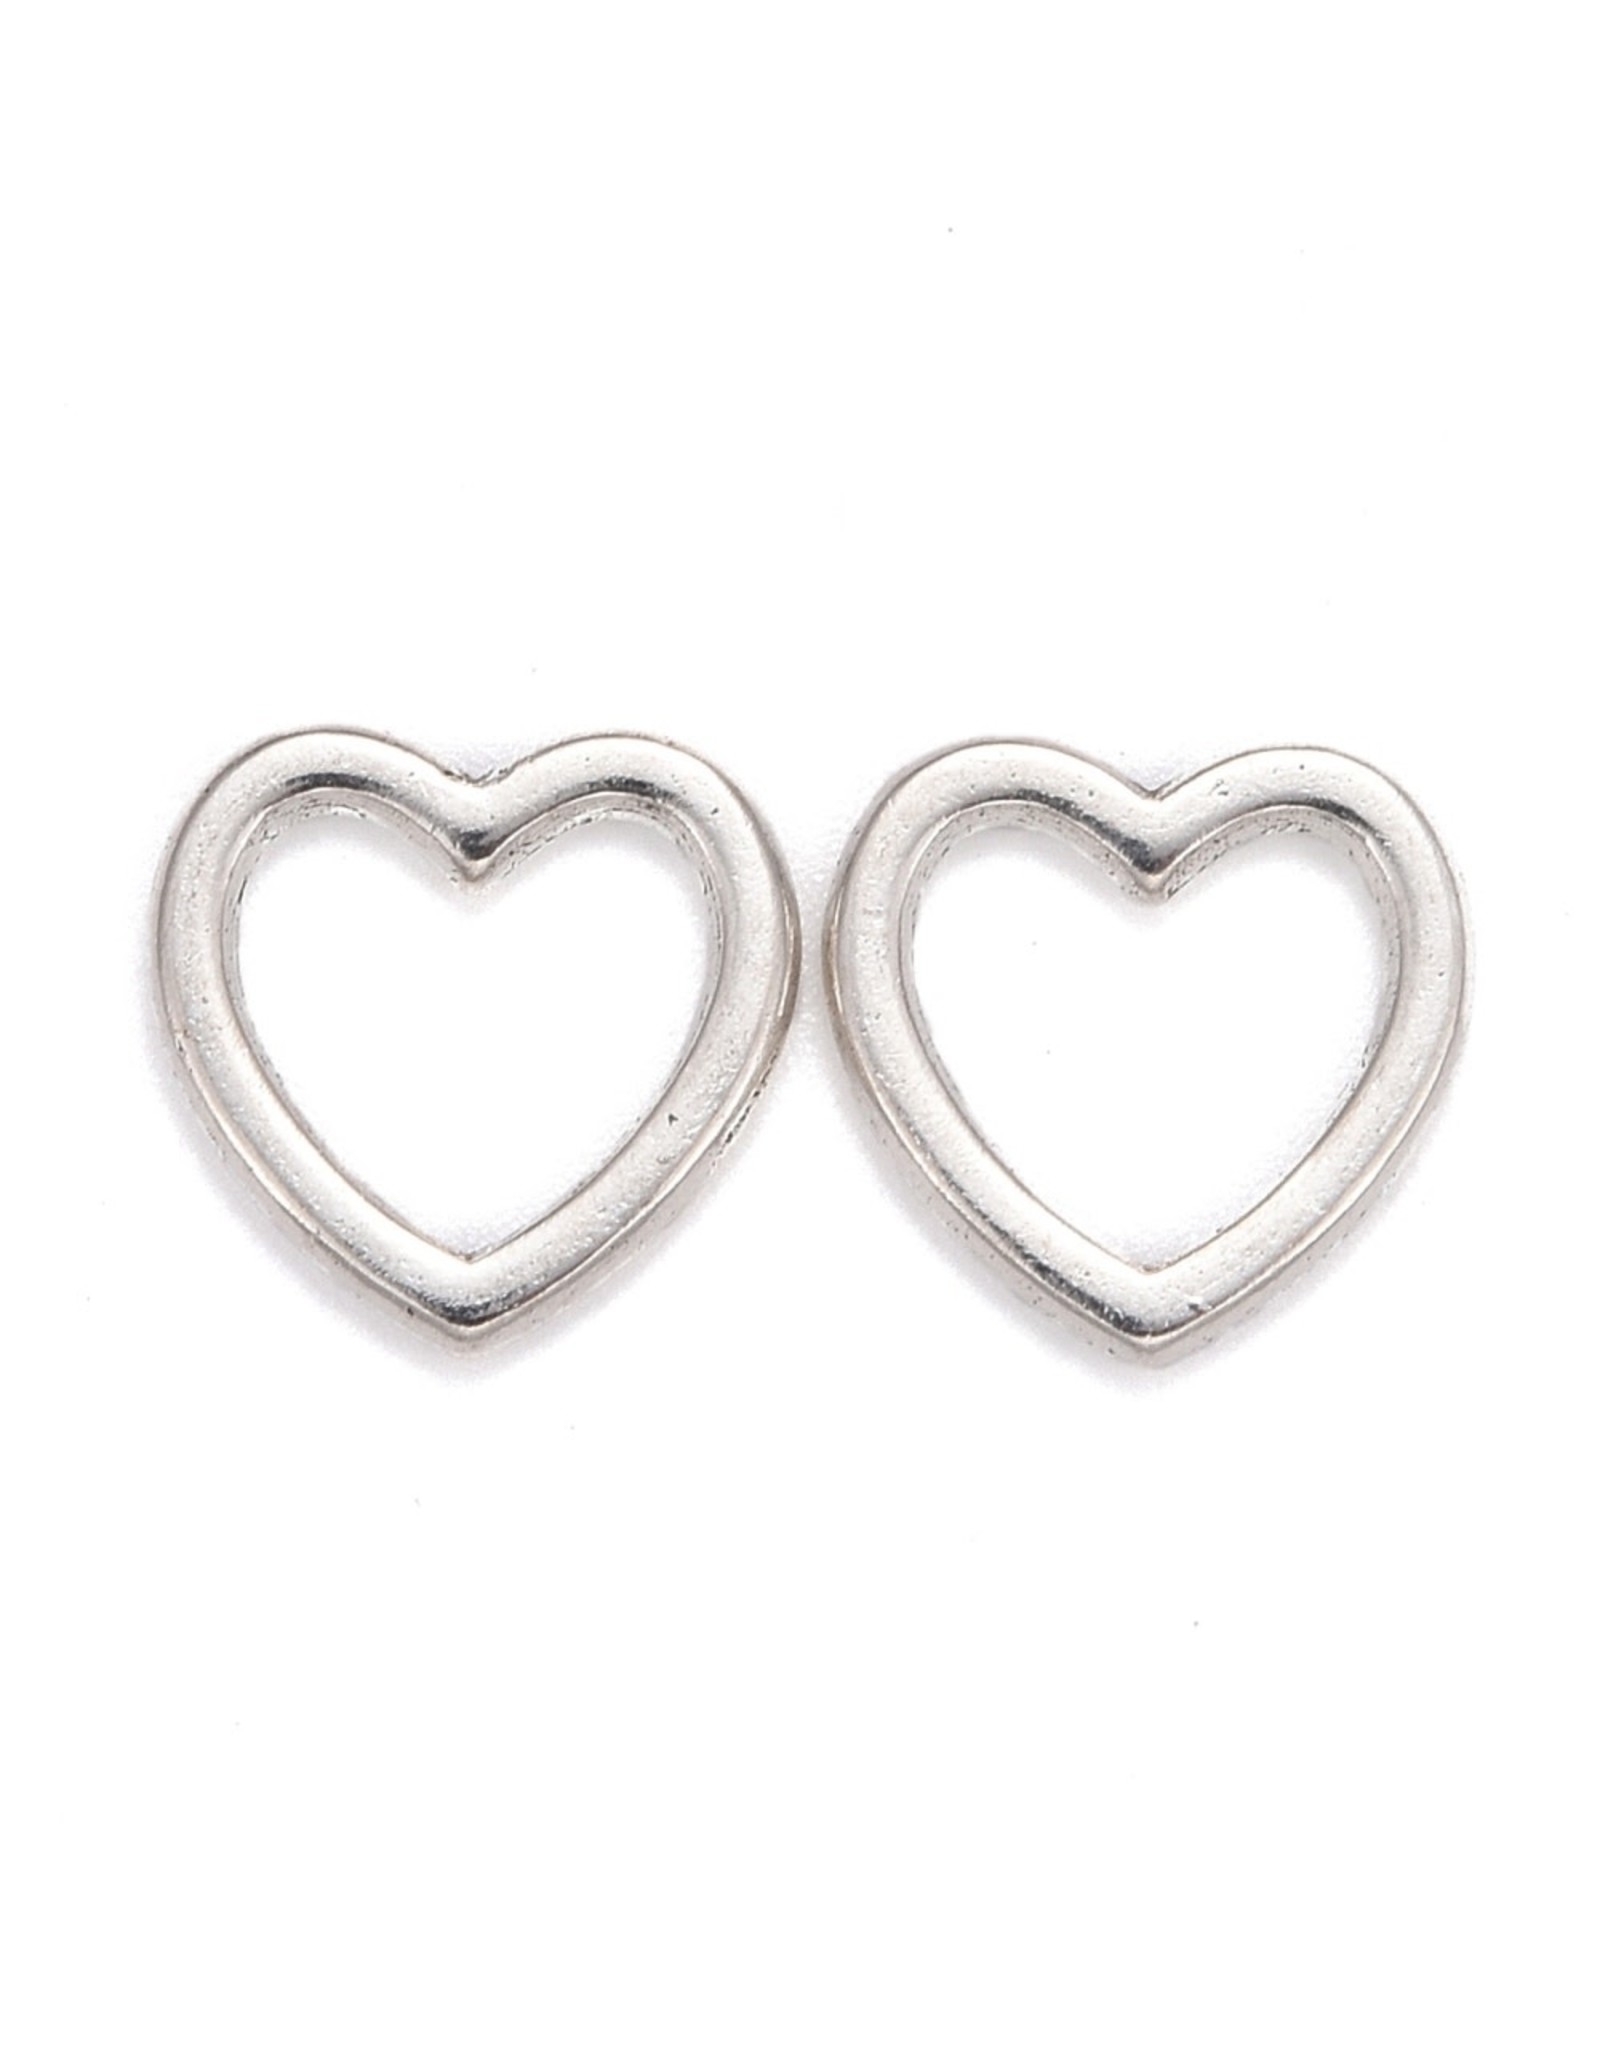 Heart Link  10mm  Silver  x10  NF